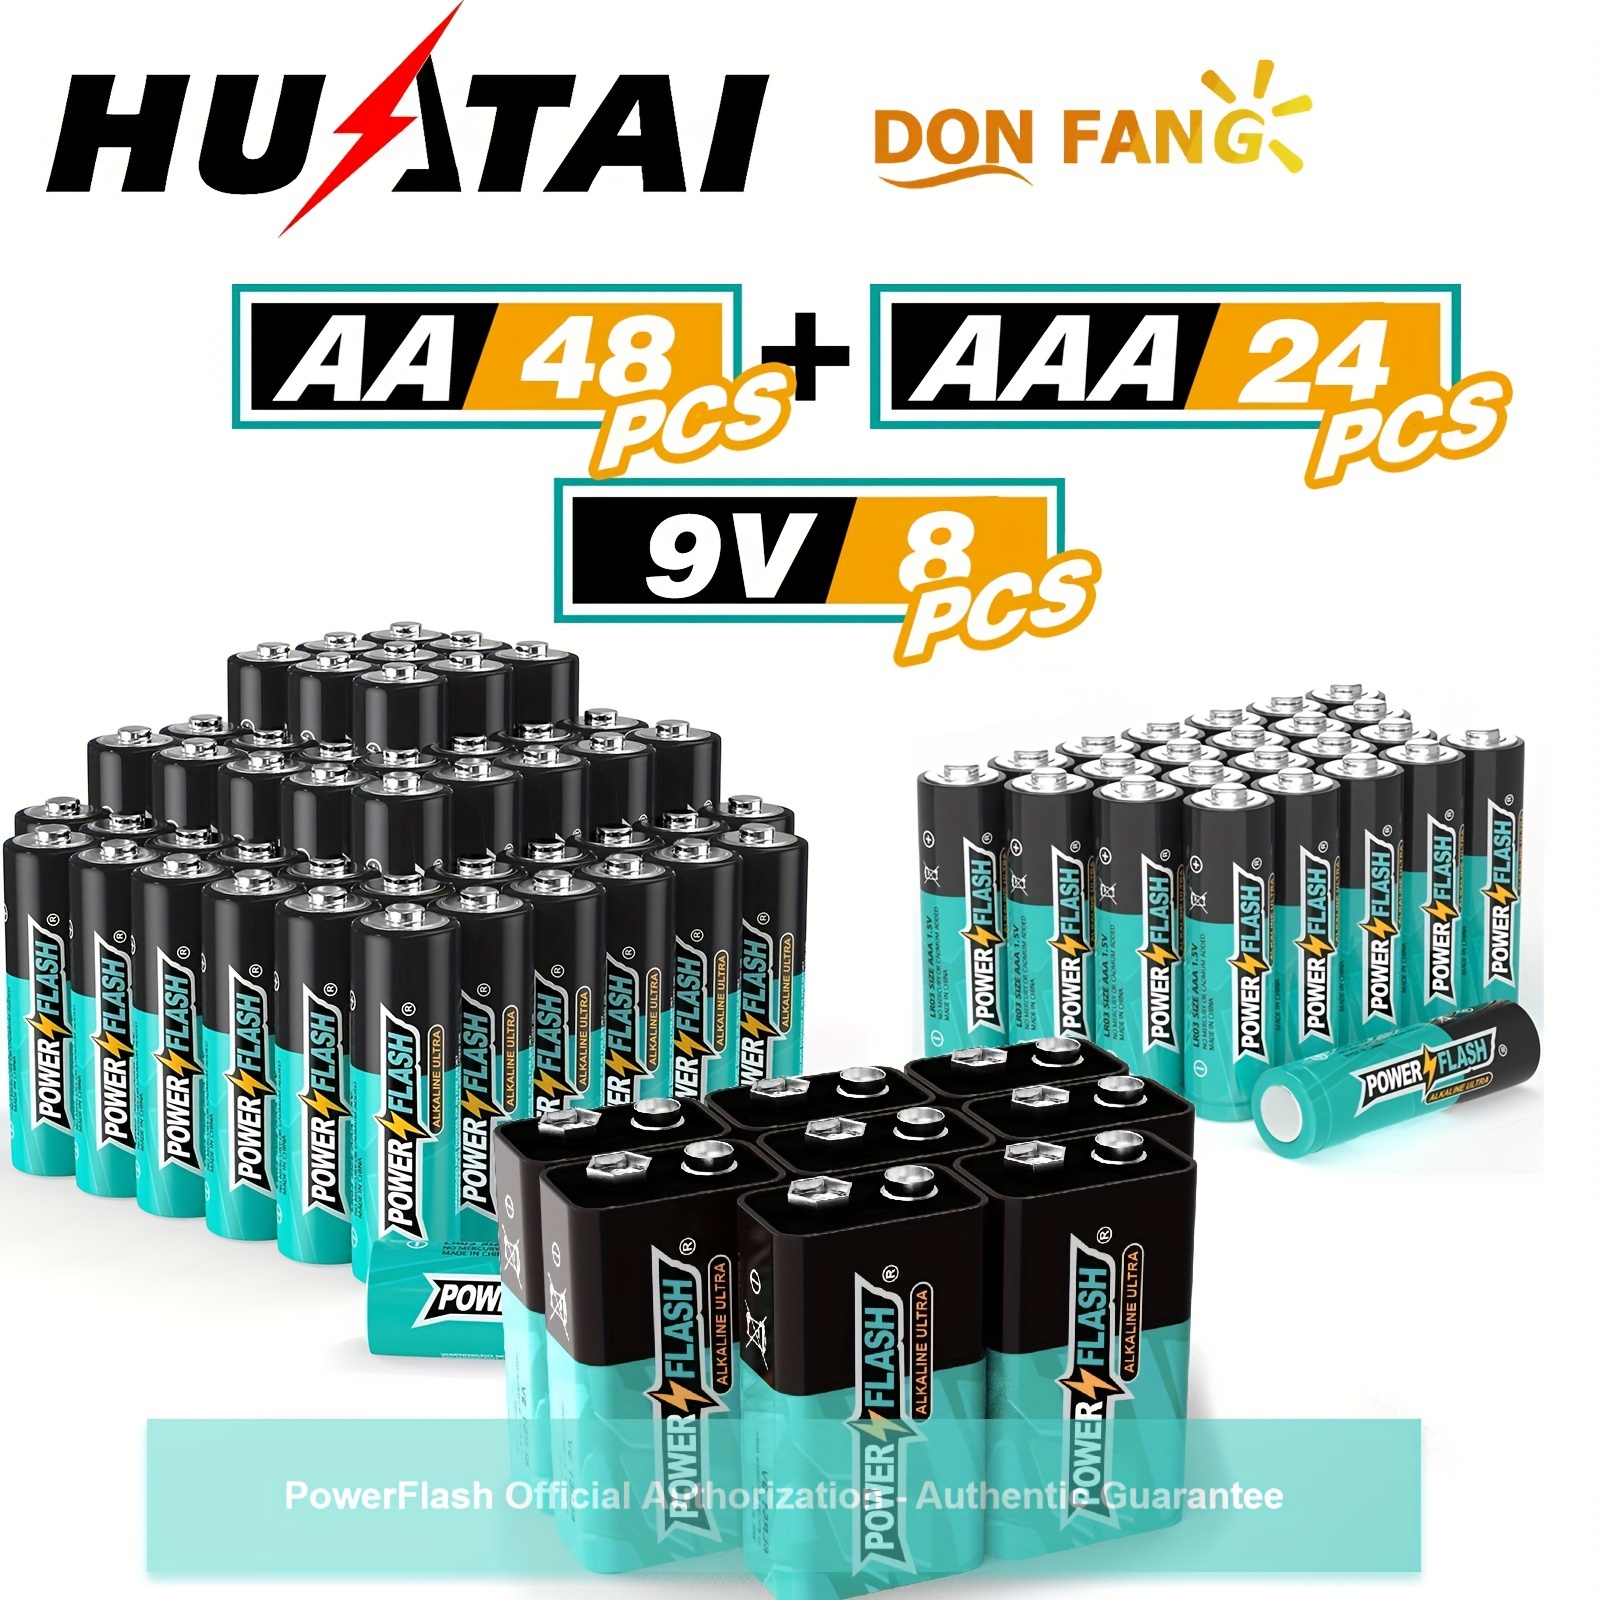 

Powerflash Alkaline Long-lasting Batteries, Combo Pack, Set Of 24 Aaa And 48 Aa And 8 Pcs 9v Batteries For Home, Various Household Device, Work